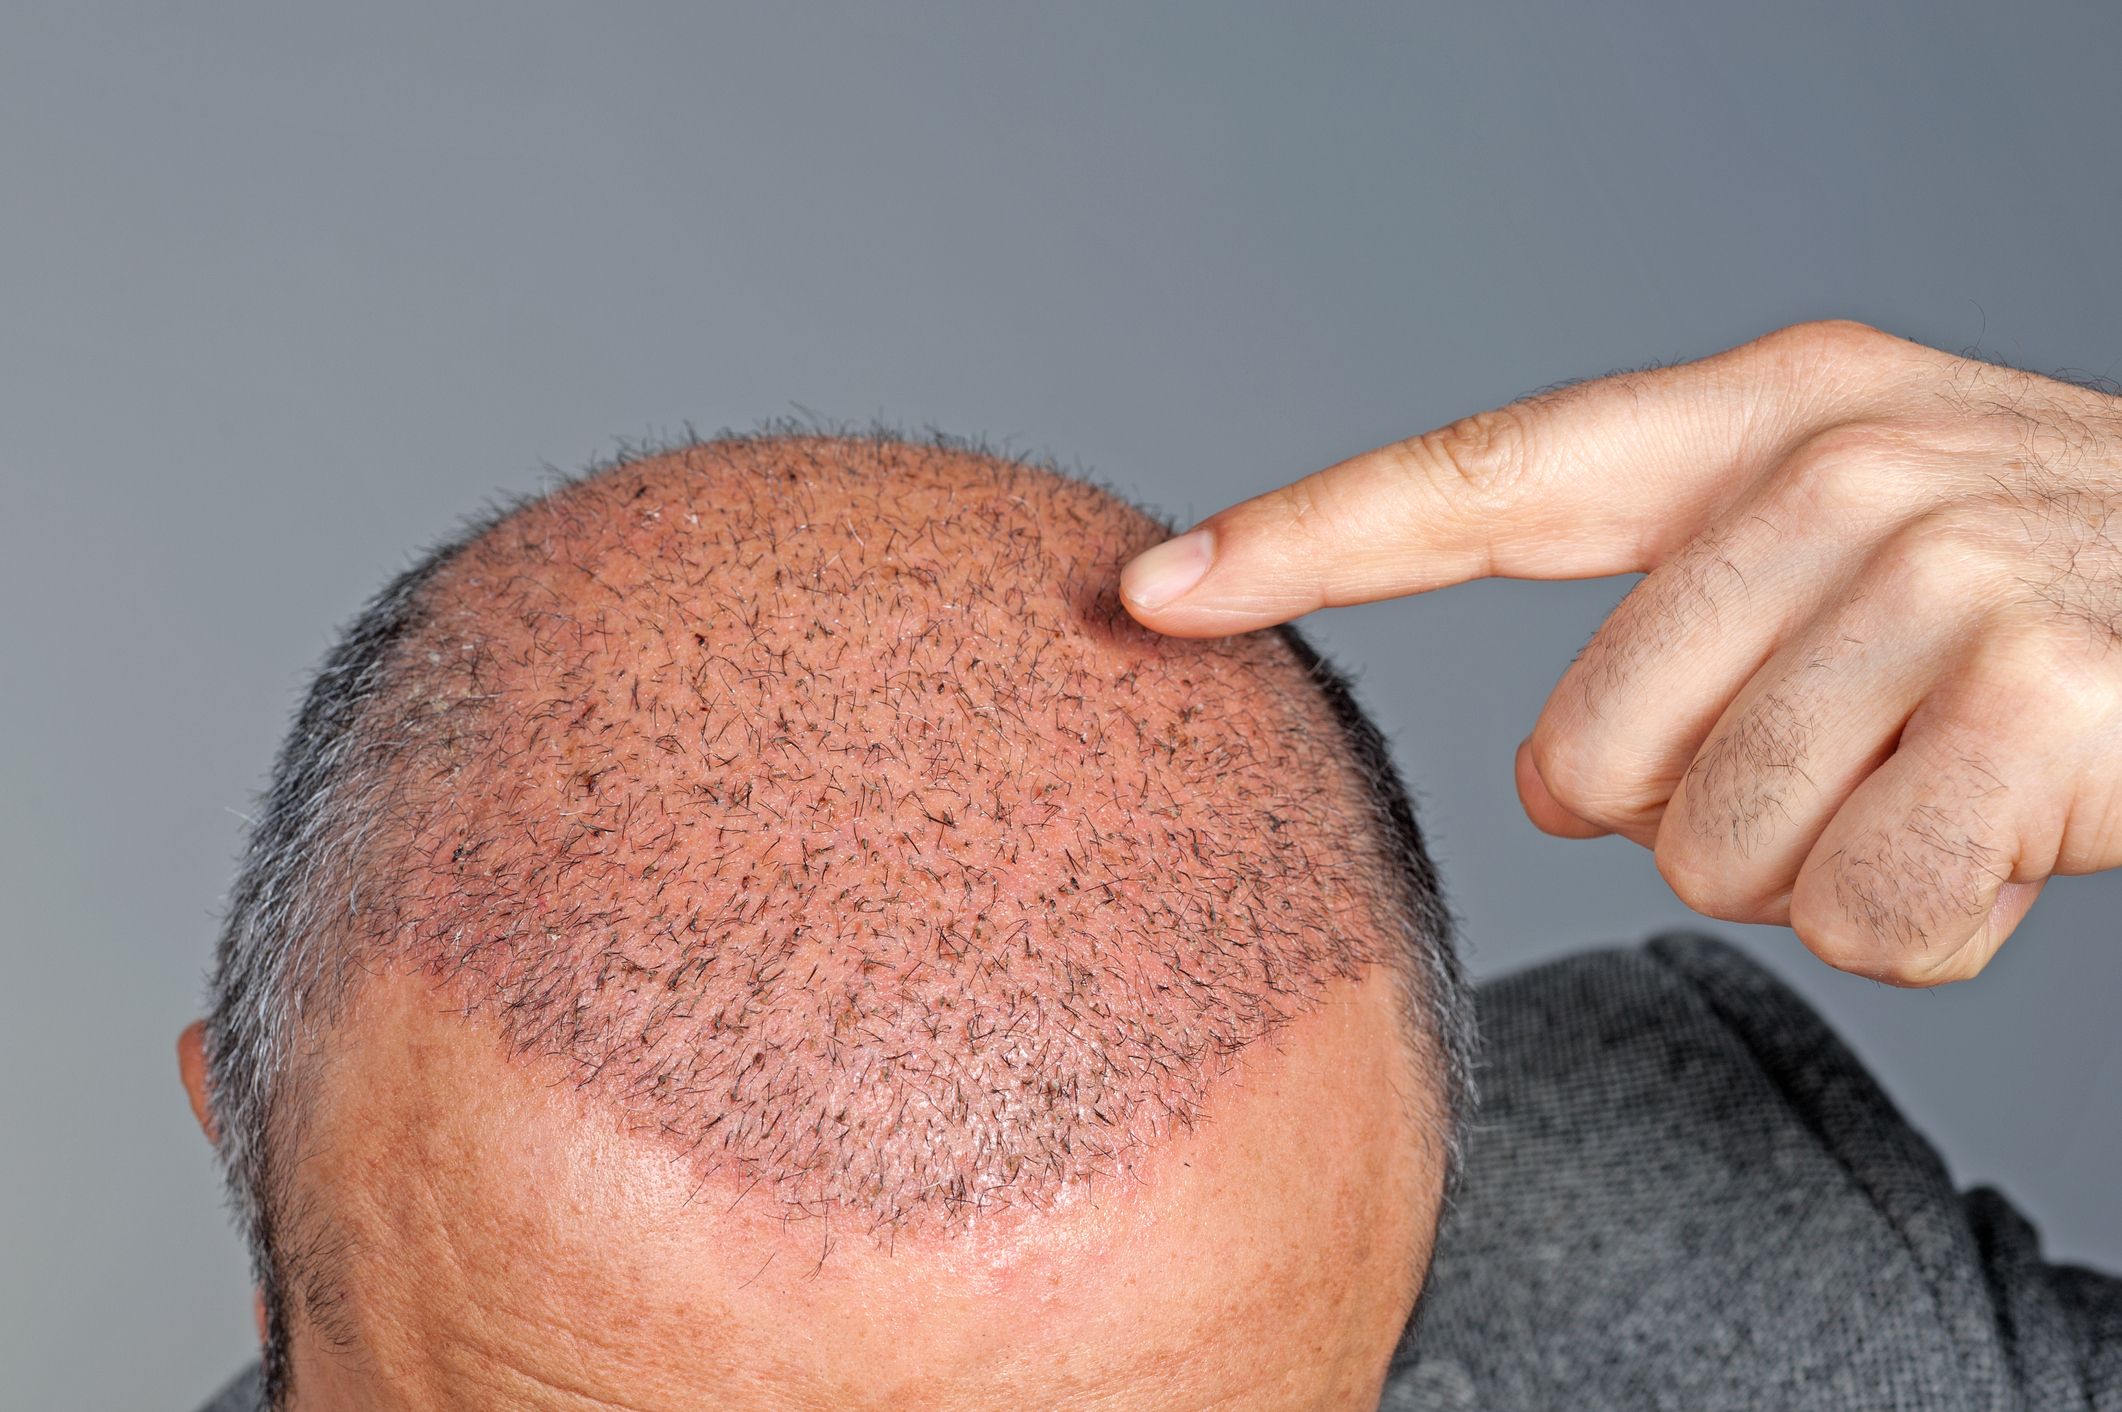 Why FUE hair transplants are the most popular